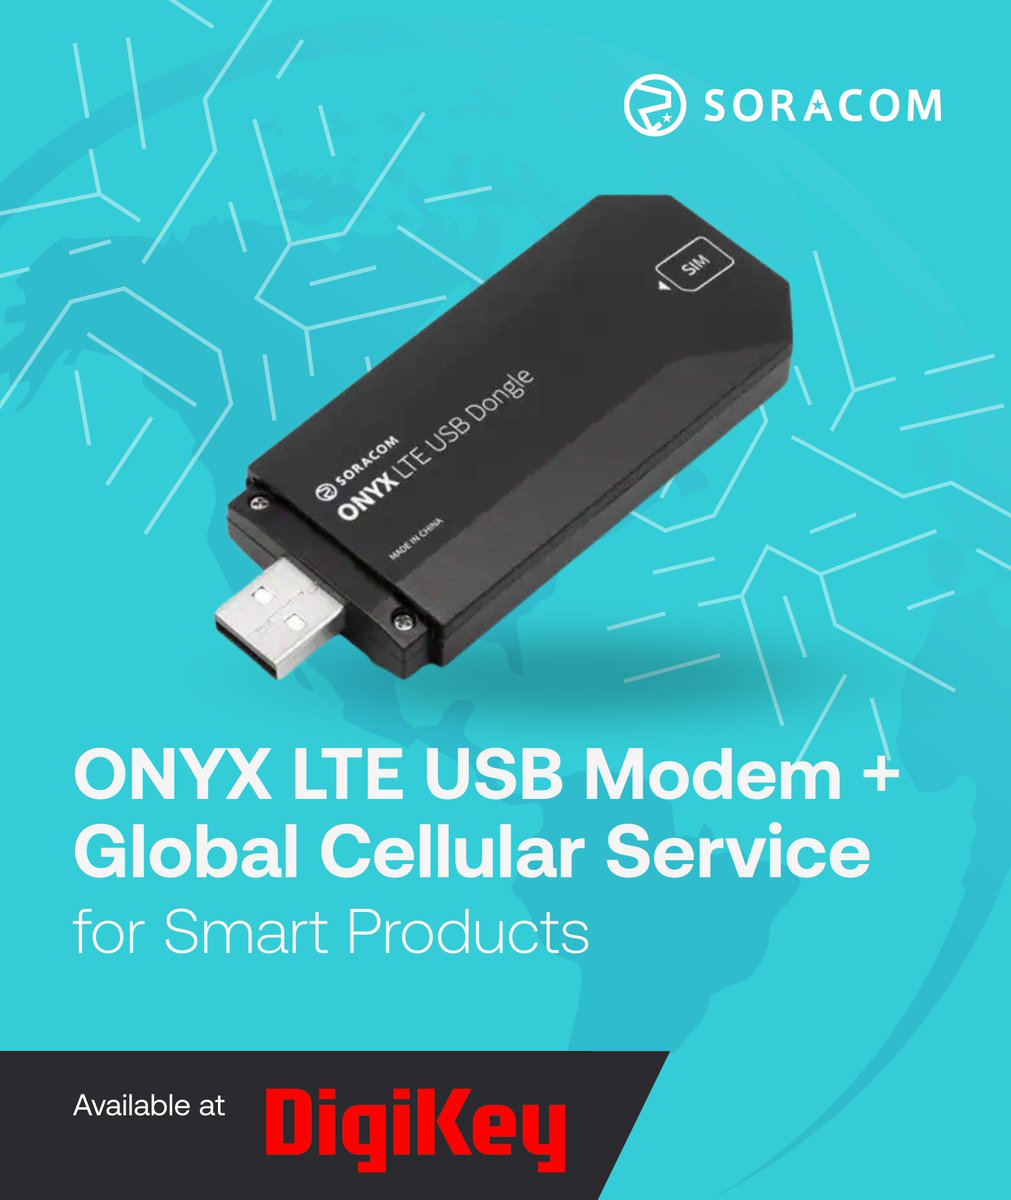 🚀 Take your #IoT and #M2M applications to the next level with the Soracom Onyx. 🌐 This high-performance device provides reliable global connectivity with seamless integration into various system architectures! Get it on @digikey 👉 bit.ly/48rYePE